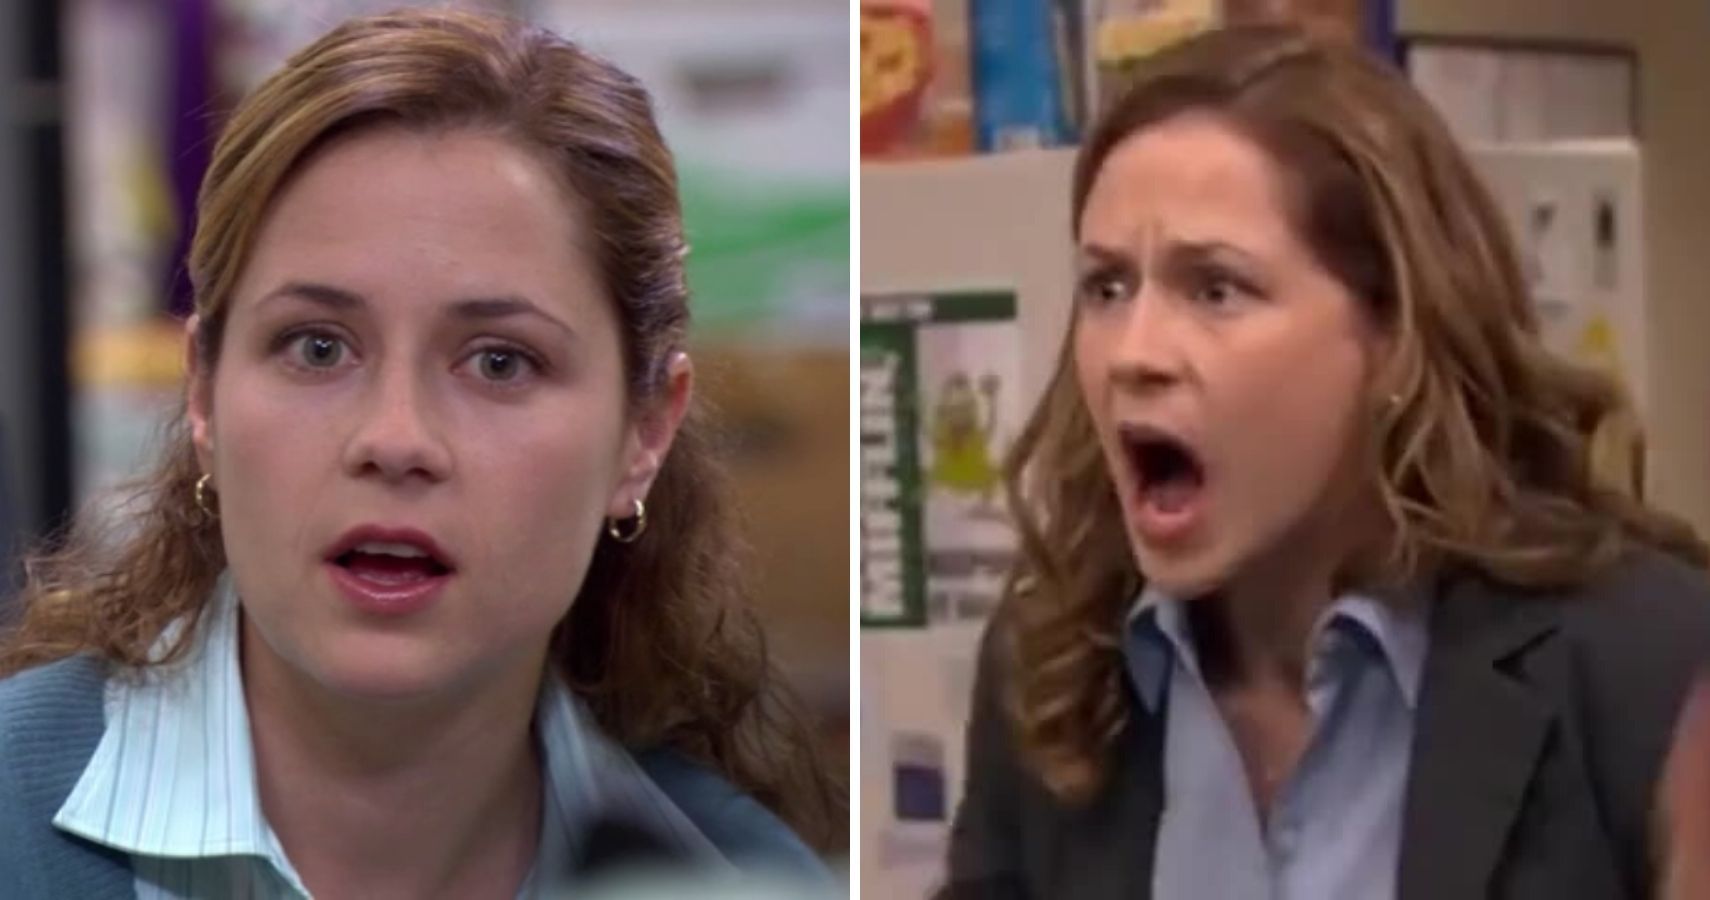 pam beesly the office